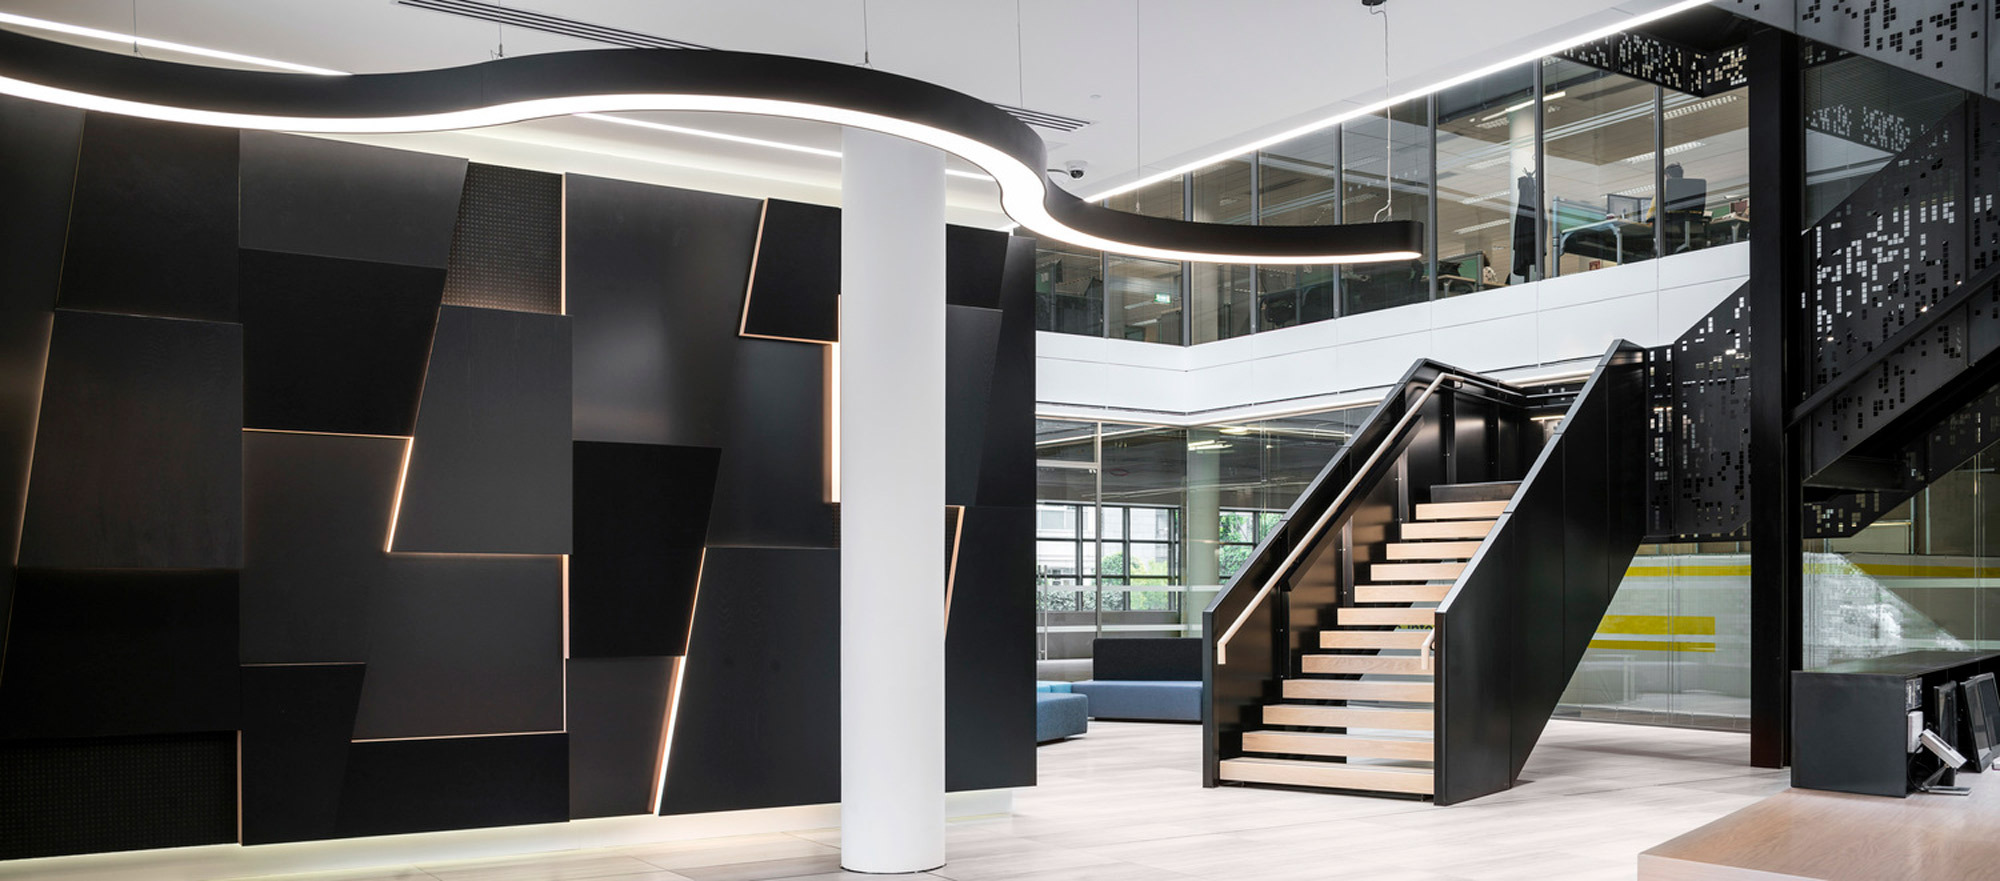 Modern office lobby featuring a sweeping white staircase with wooden steps, flanked by geometrically patterned black wall panels and illuminated by an undulating strip of overhead lighting. Clear glass balustrades outline mezzanine levels, illuminating the space with natural light.